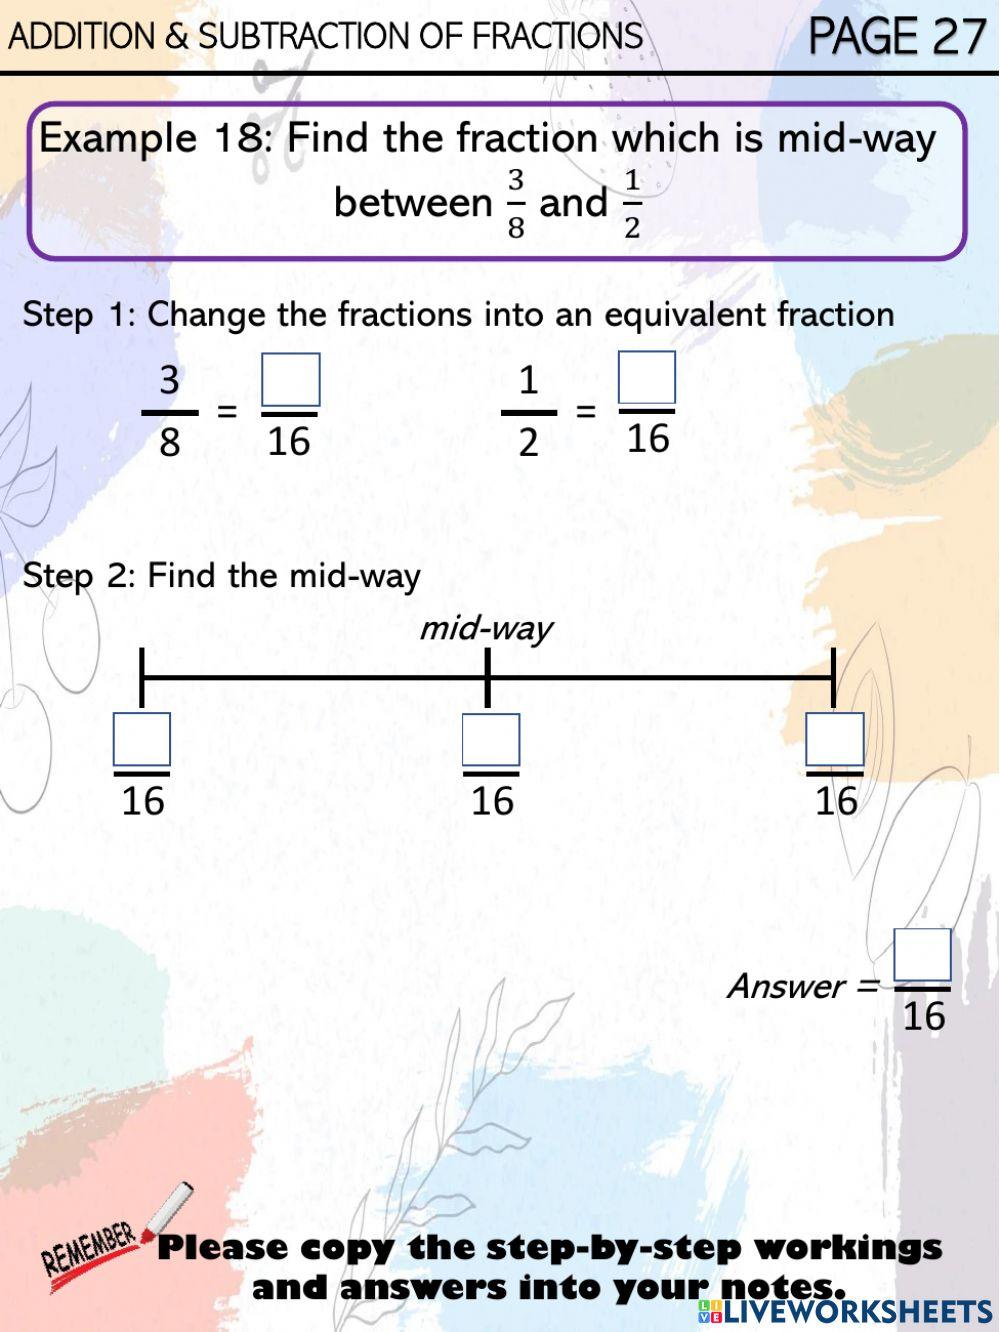 Addition and subtraction of fractions